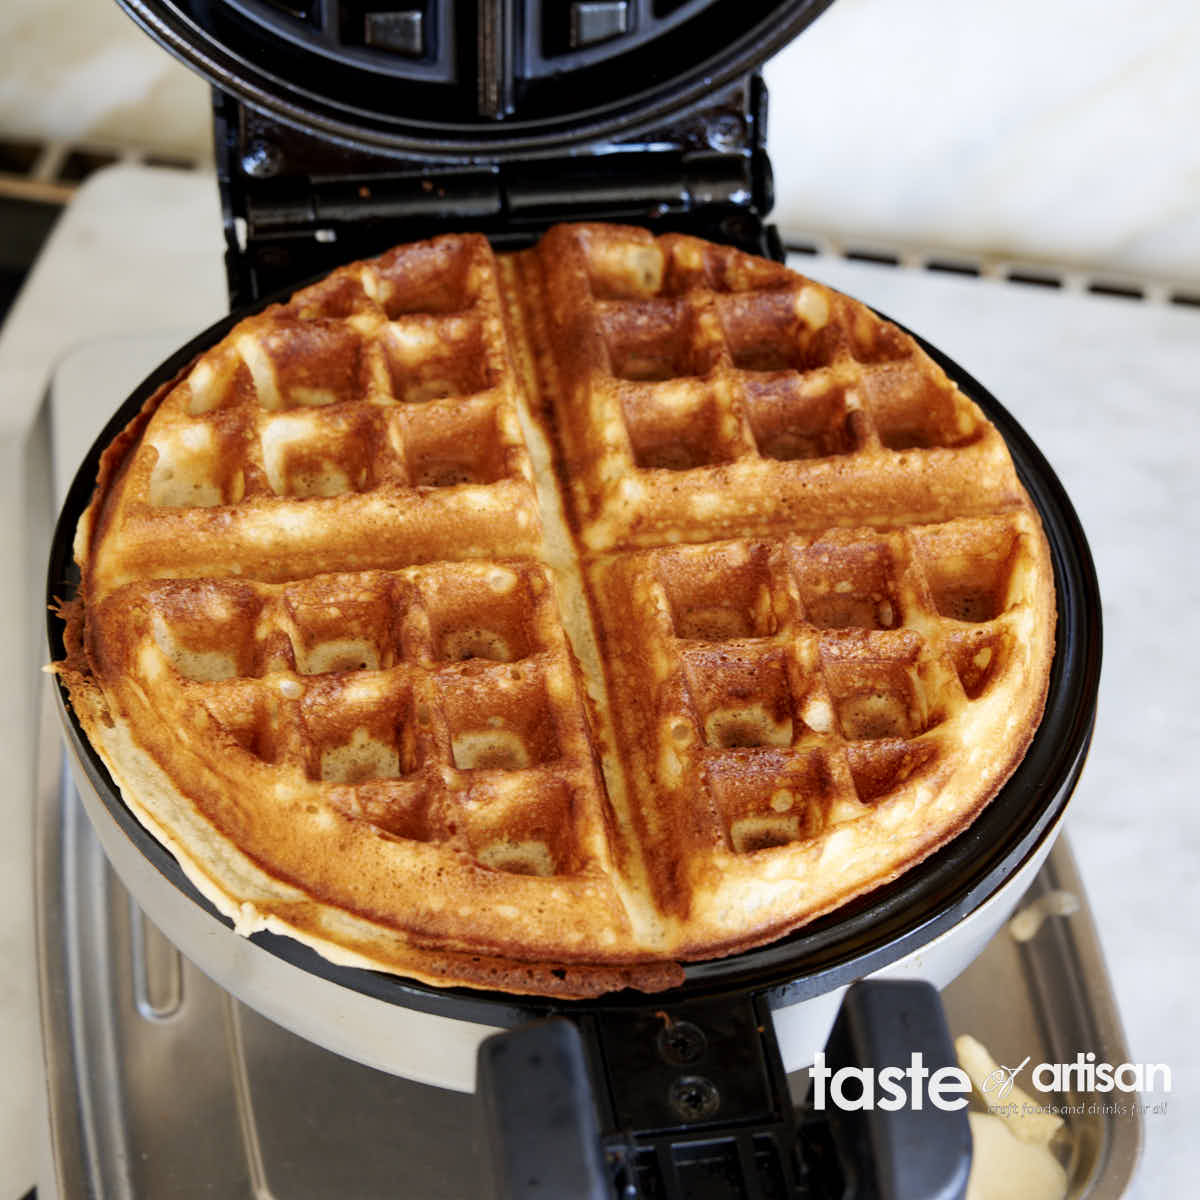 Sourdough Discard Waffles - Extra light and airy due to high hydration batter, extra crispy on the outside, and exceptionally flavorful and tasty with pleasant tartness from useing sourdough discard. 